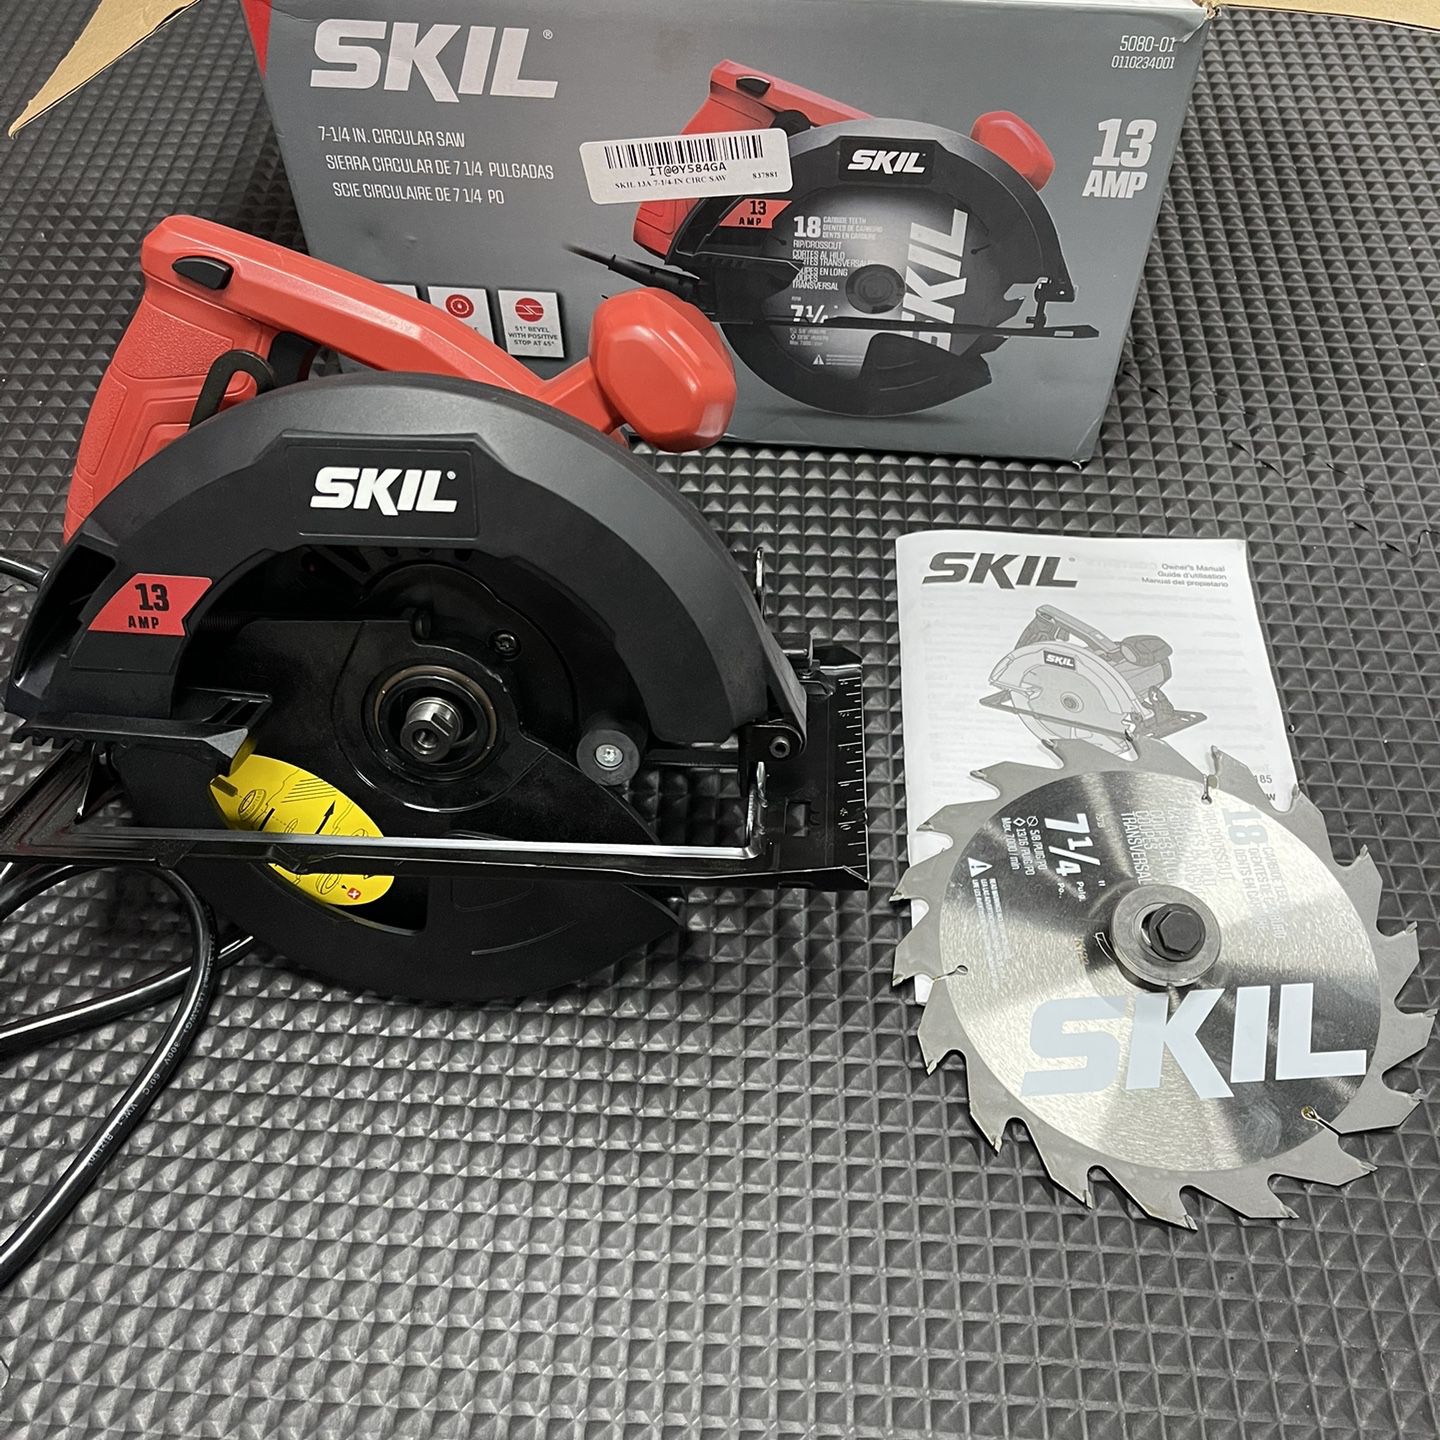 Skil 13-Amp 7-1/4-Inch Circular Saw for Sale in Scranton, PA OfferUp